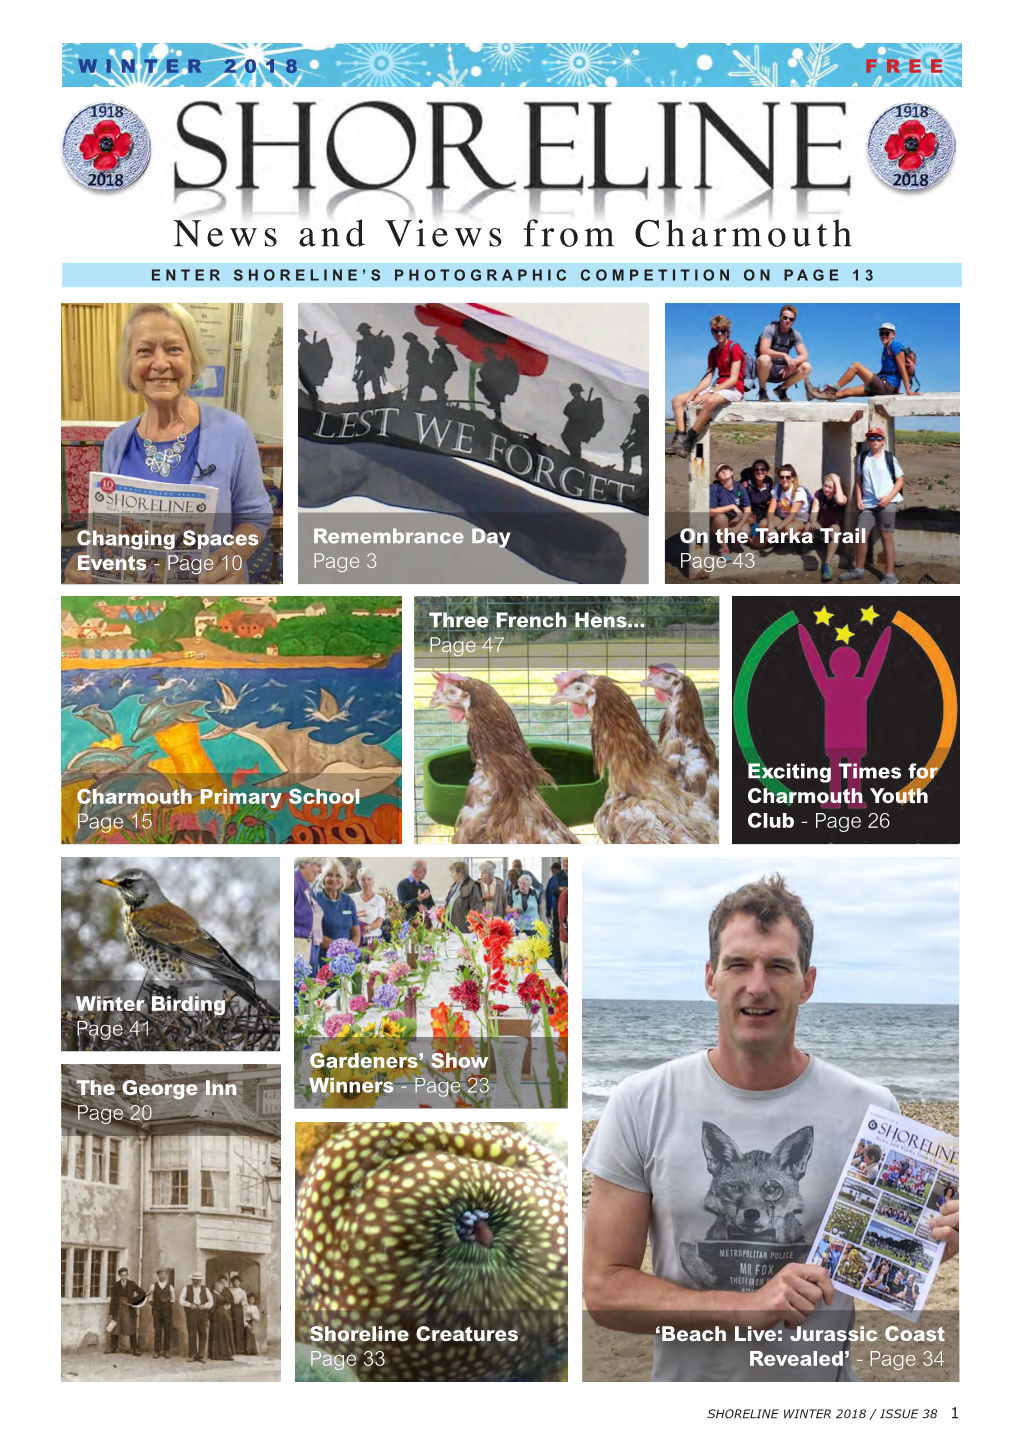 News and Views from Charmouth ENTER SHORELINE’S PHOTOGRAPHIC COMPETITION on PAGE 13